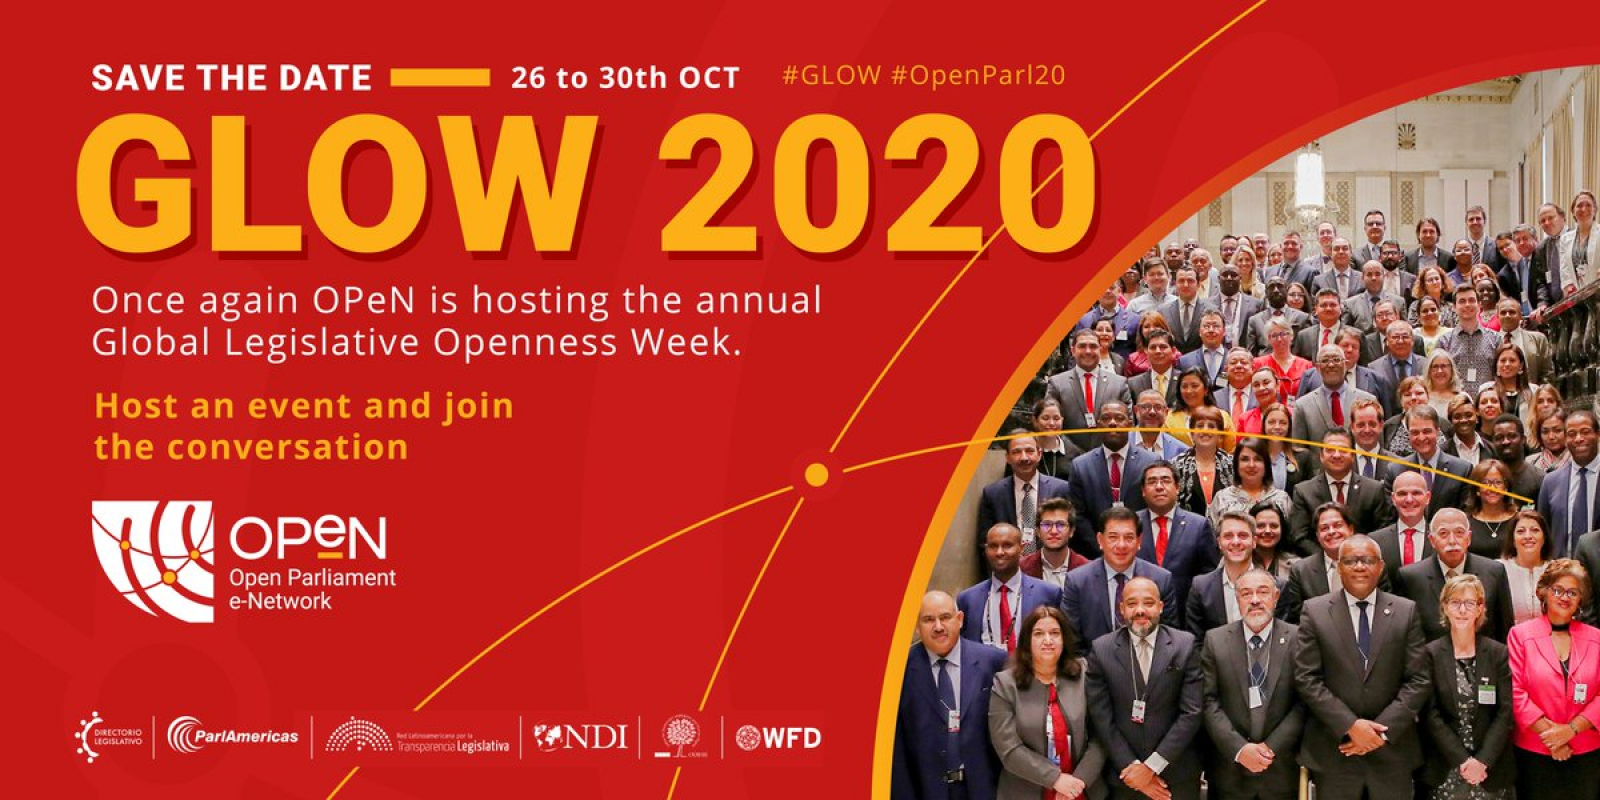 GLOW: Open Parliaments prove their strength in an unprecedented year